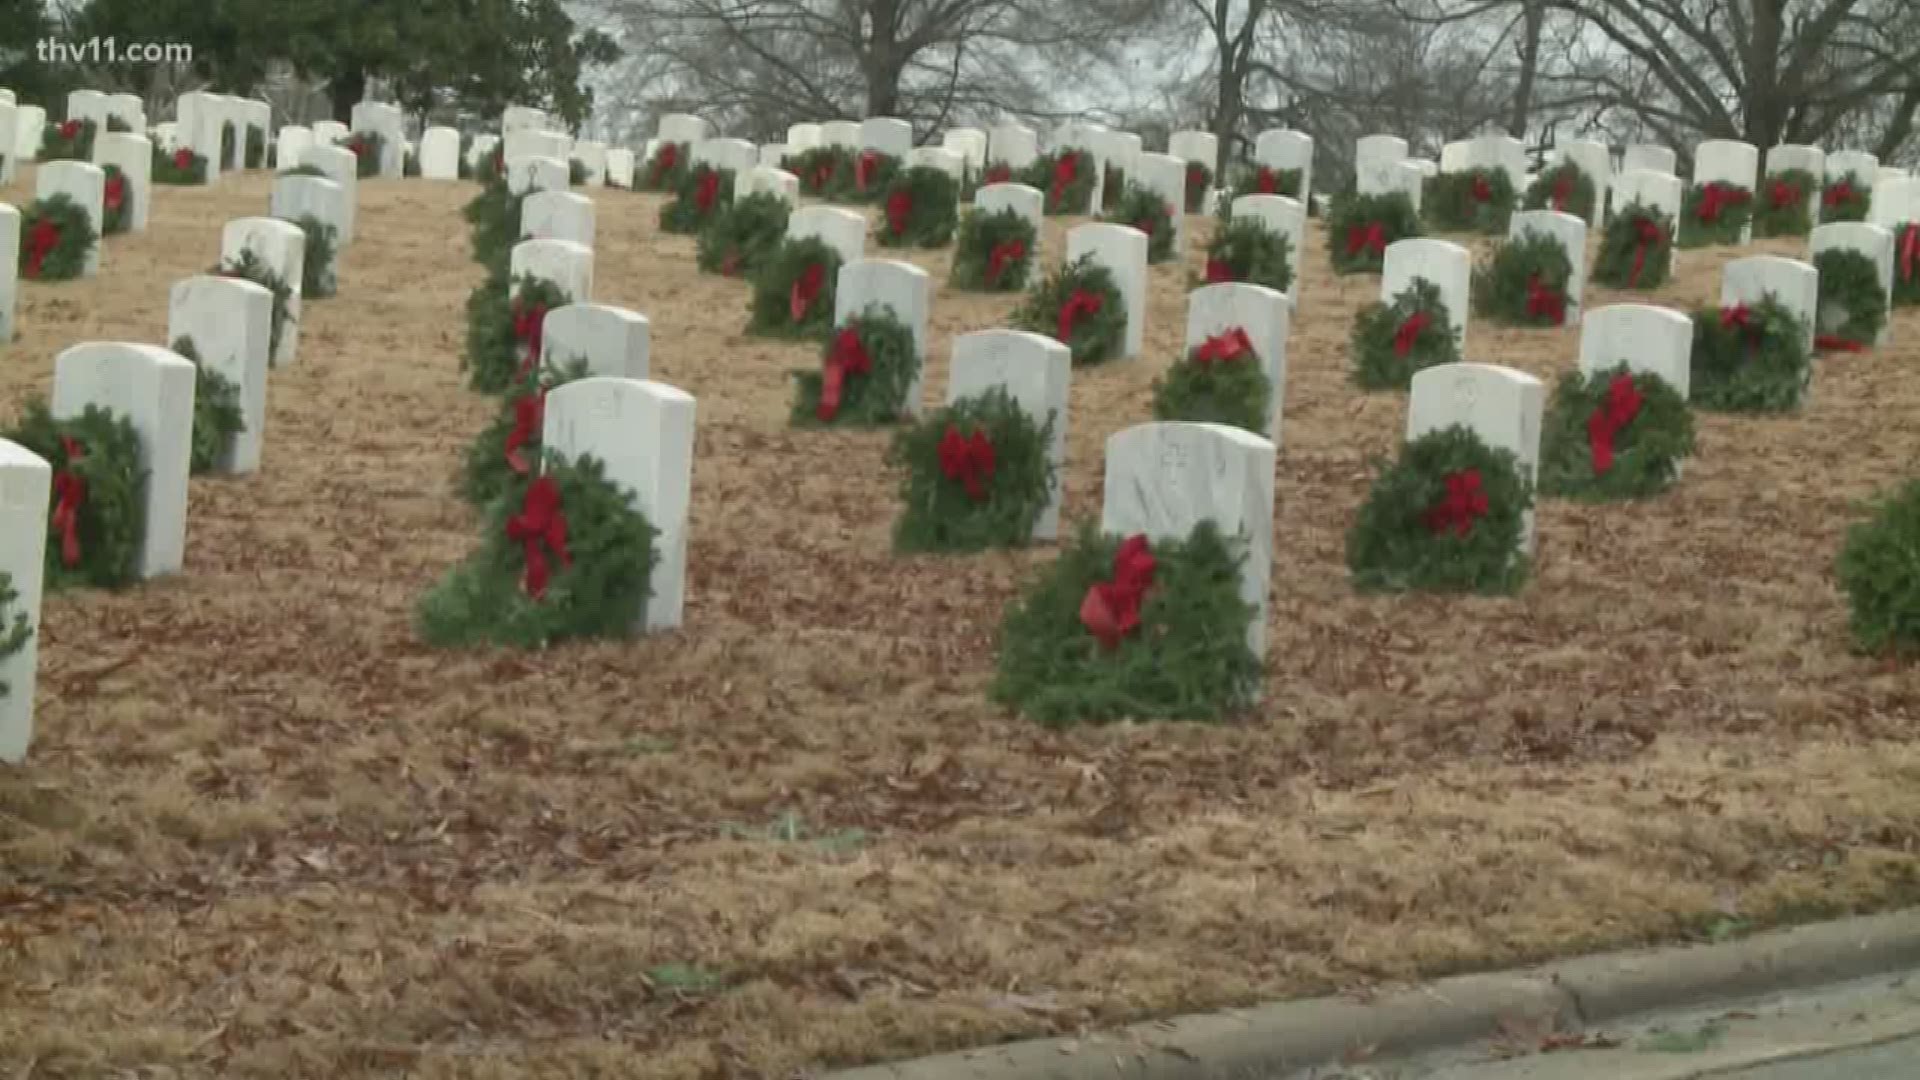 Our fallen veterans were honored today with wreaths at the Little Rock National Cemetery.